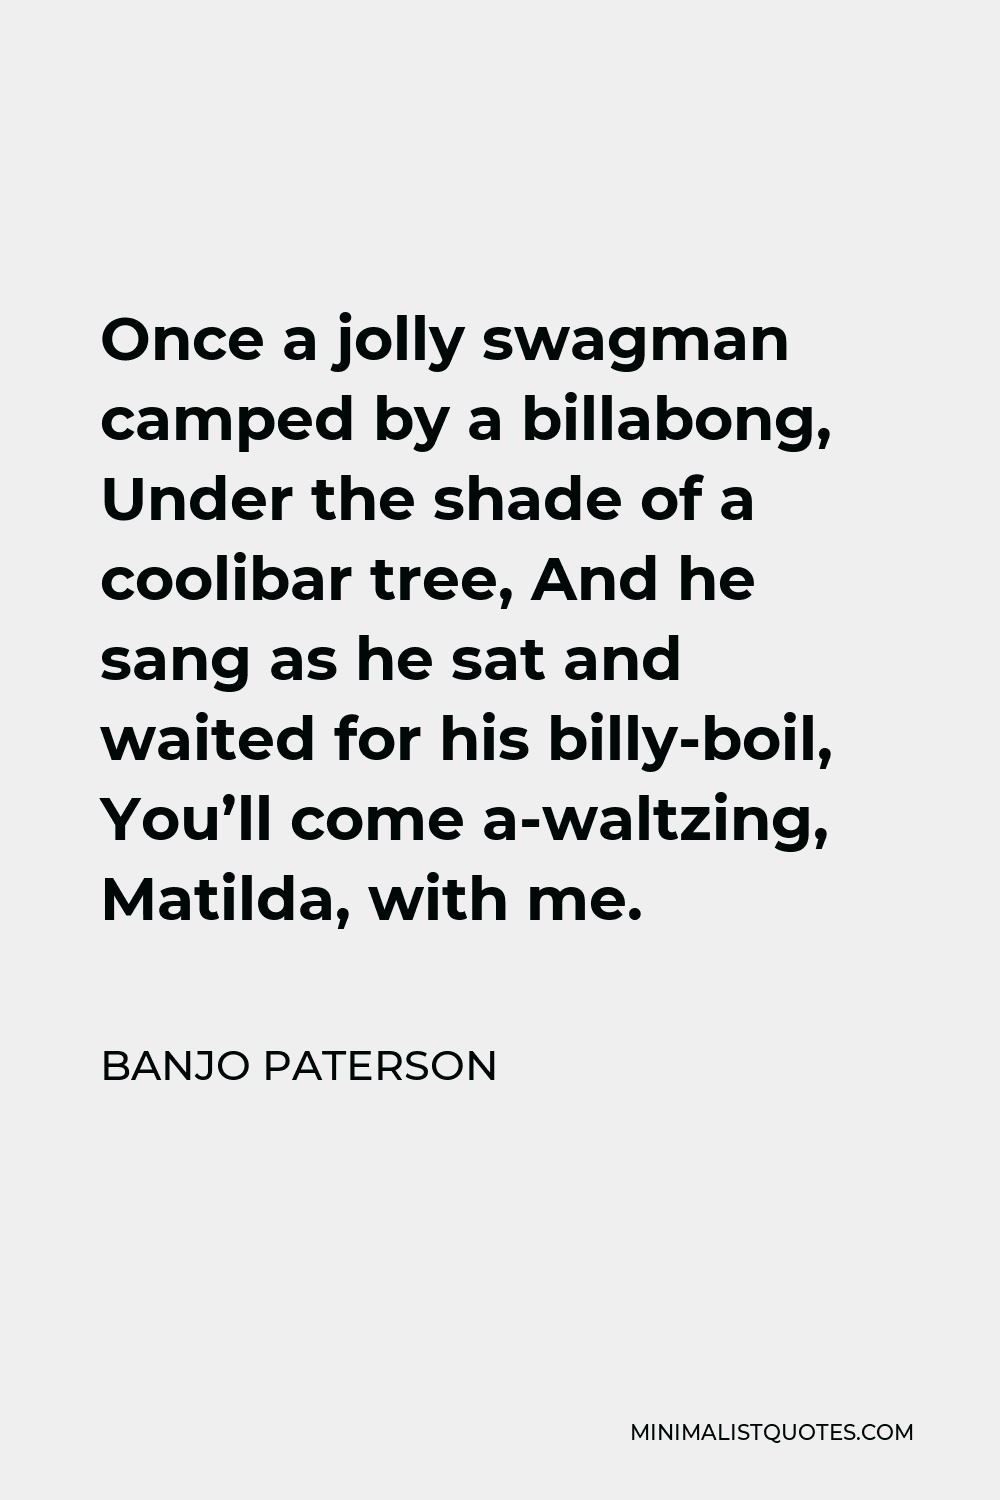 Banjo Paterson Quote - Once a jolly swagman camped by a billabong, Under the shade of a coolibar tree, And he sang as he sat and waited for his billy-boil, You’ll come a-waltzing, Matilda, with me.